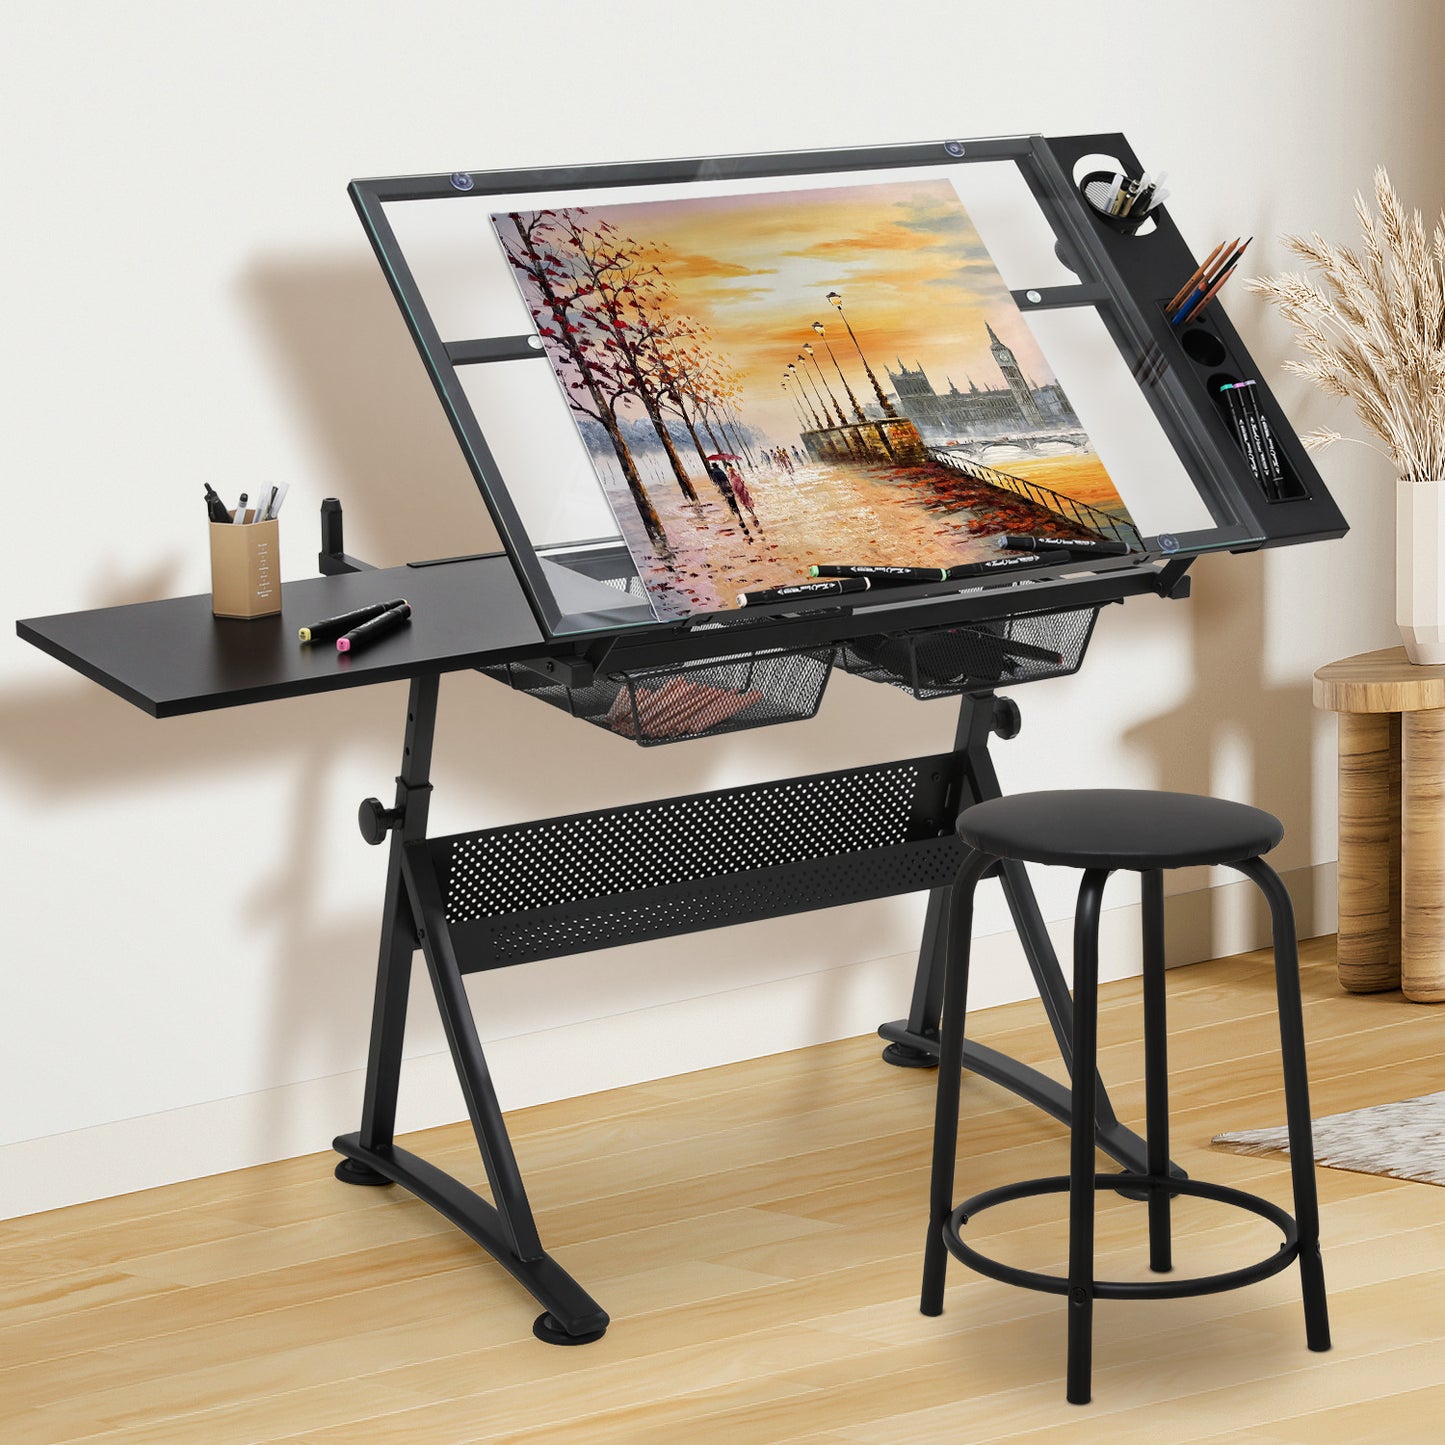 Drafting Table - 53" Crystal desktop with frame, 2 mesh drawers, with black stool